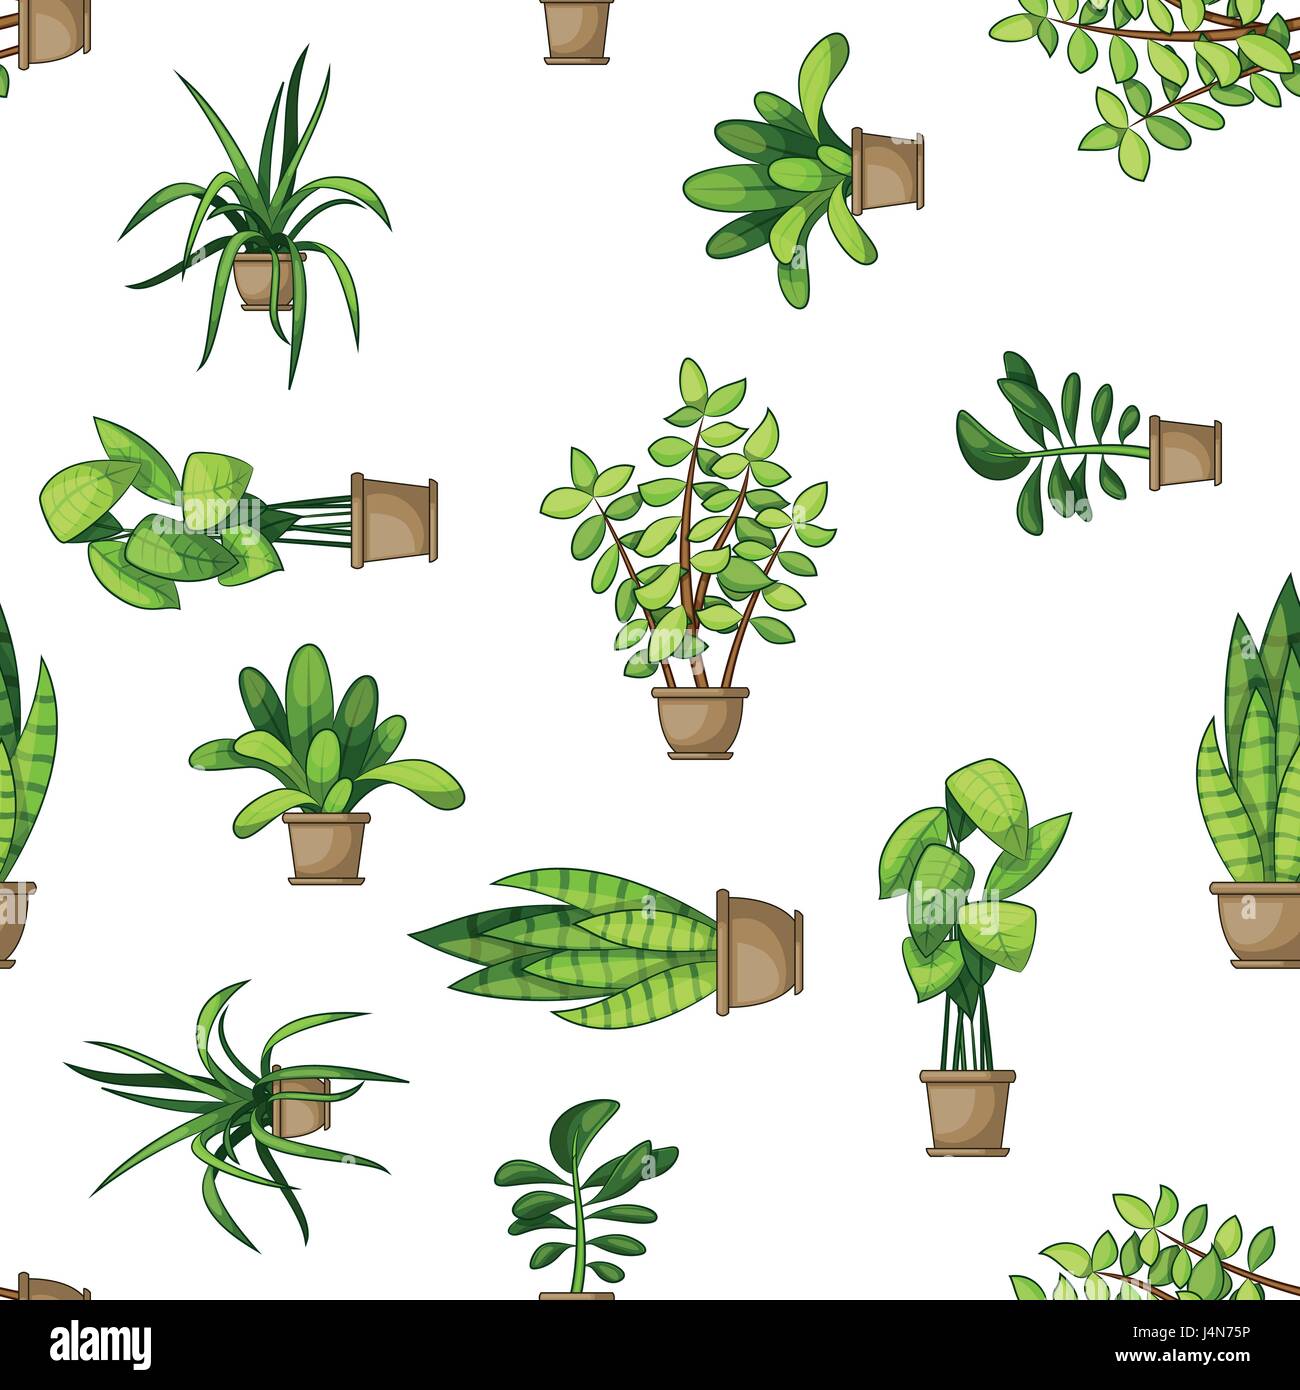 Seamless cartoon nature background with different house plants Stock Vector